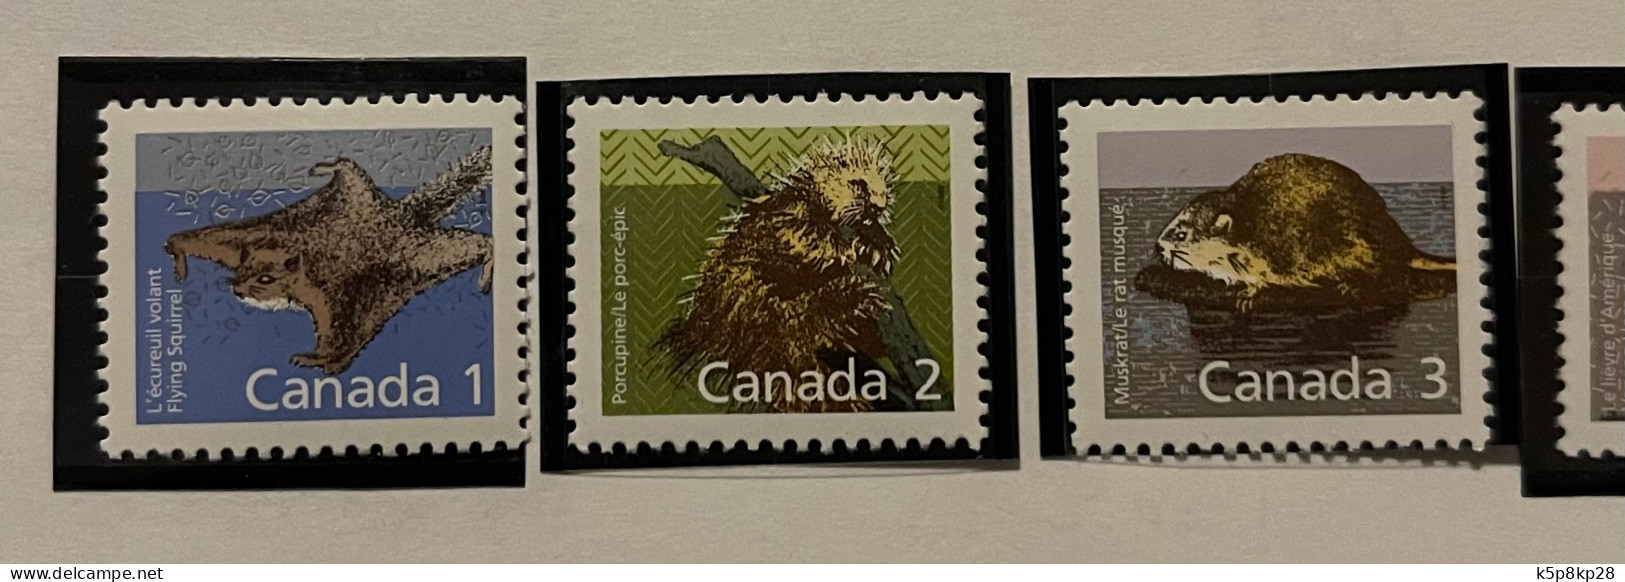 1987 Canada Stamps, Wild Definitives, 6 Value, MNH, VF - Neufs